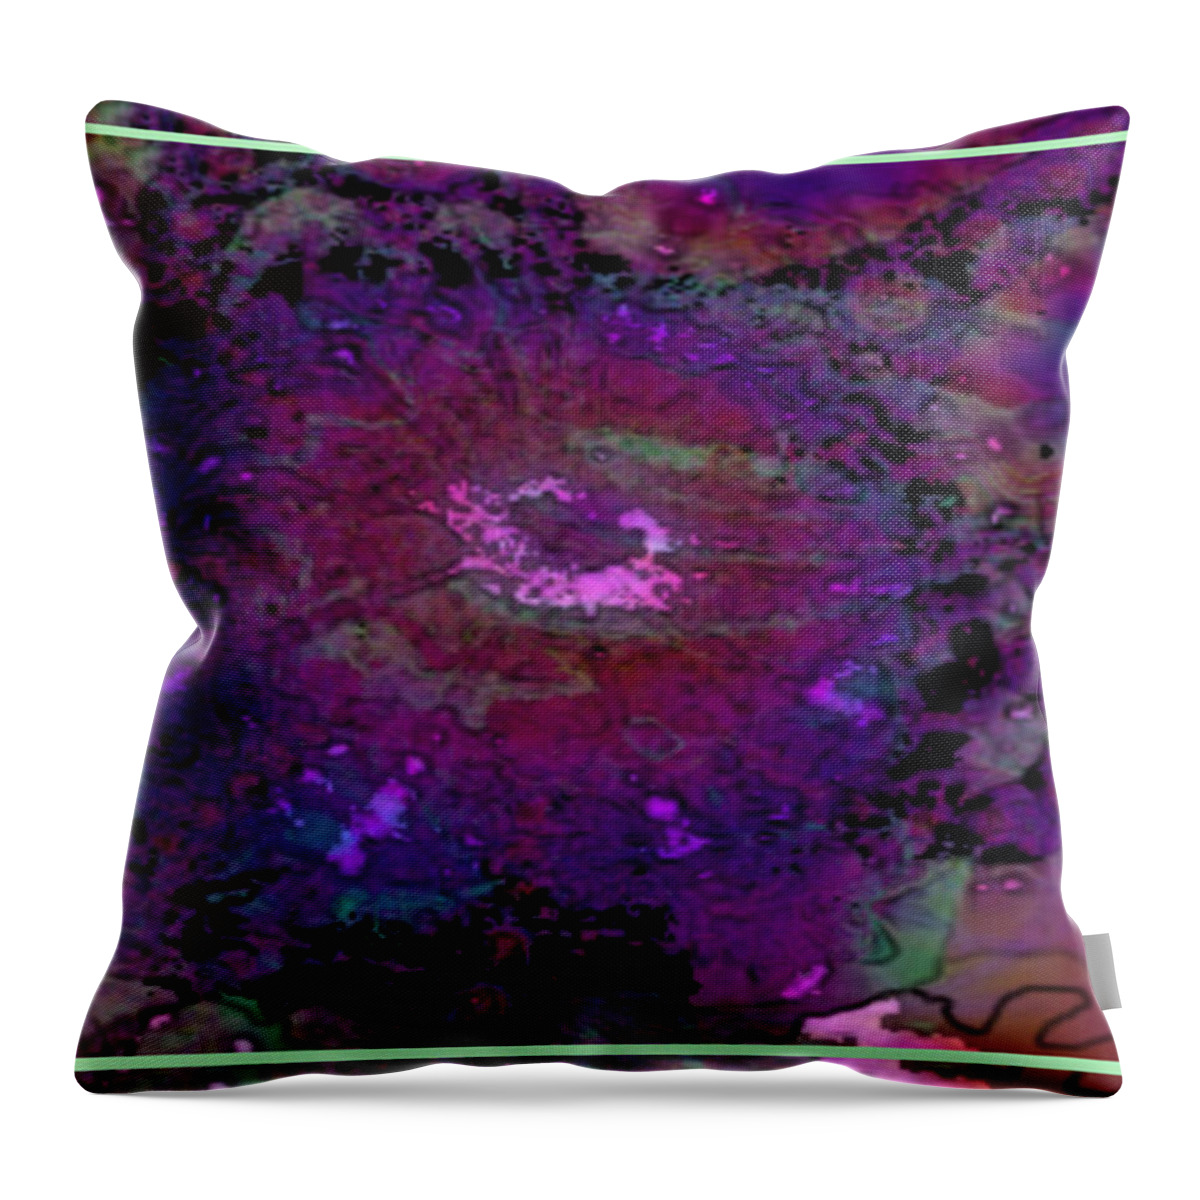 Fractal Throw Pillow featuring the digital art Eves Apple by Charmaine Zoe